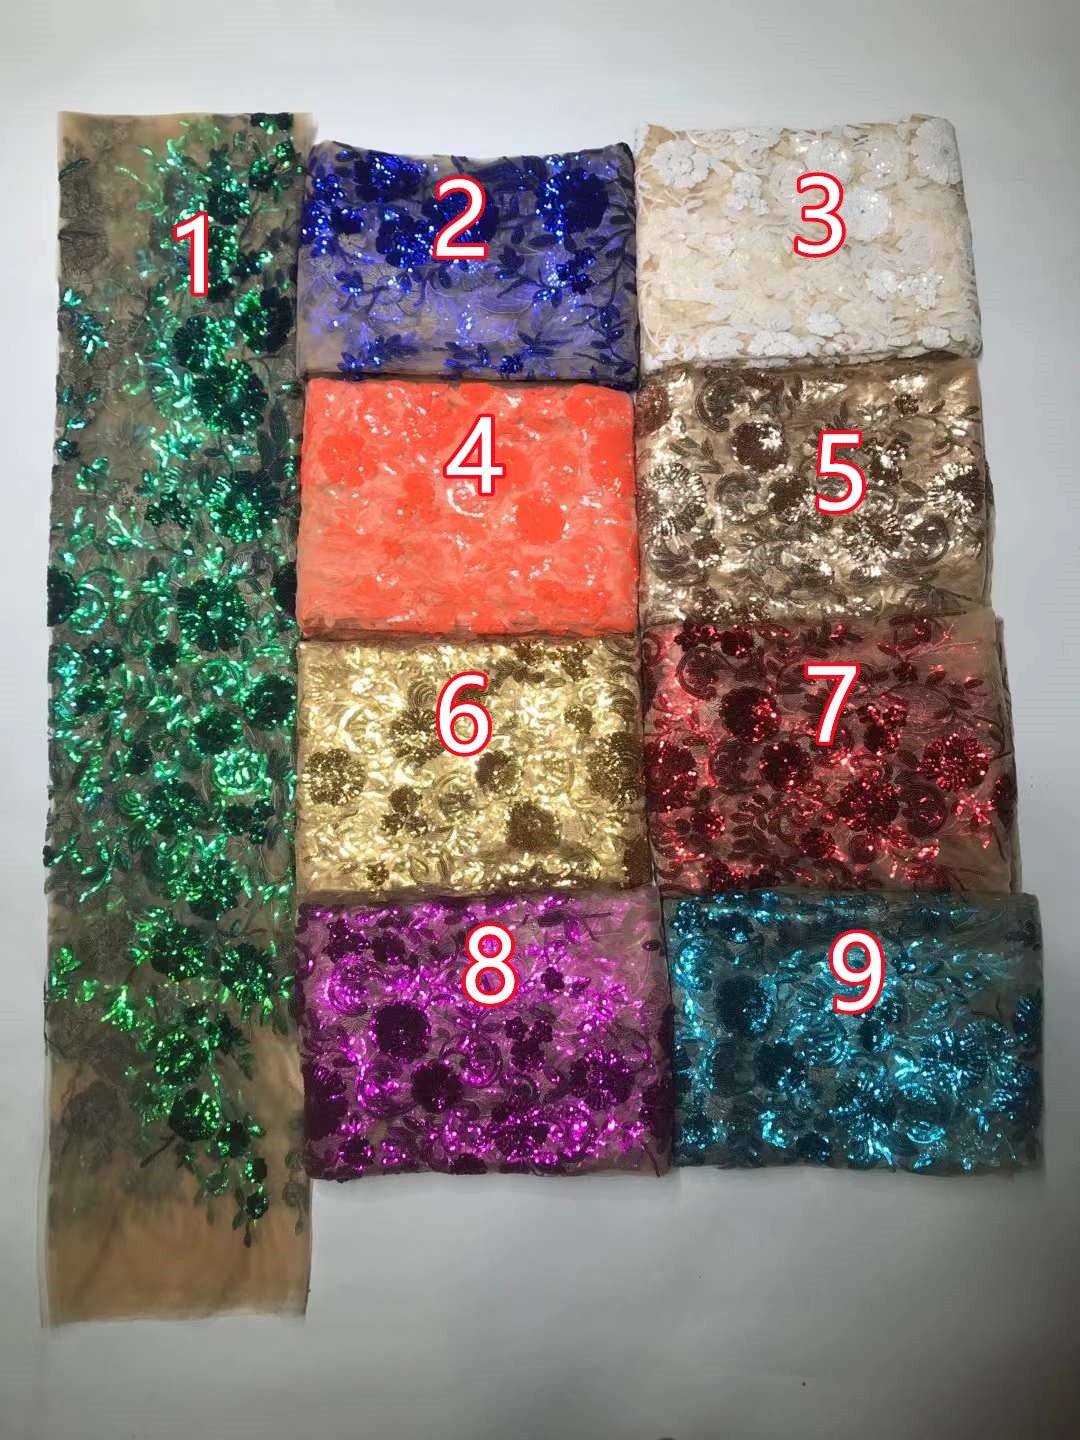 5 YARDS / 9 COLORS / Luxury Floral Sequin Embroidery Tulle Mesh Sequin Lace Fabric - Classic & Modern